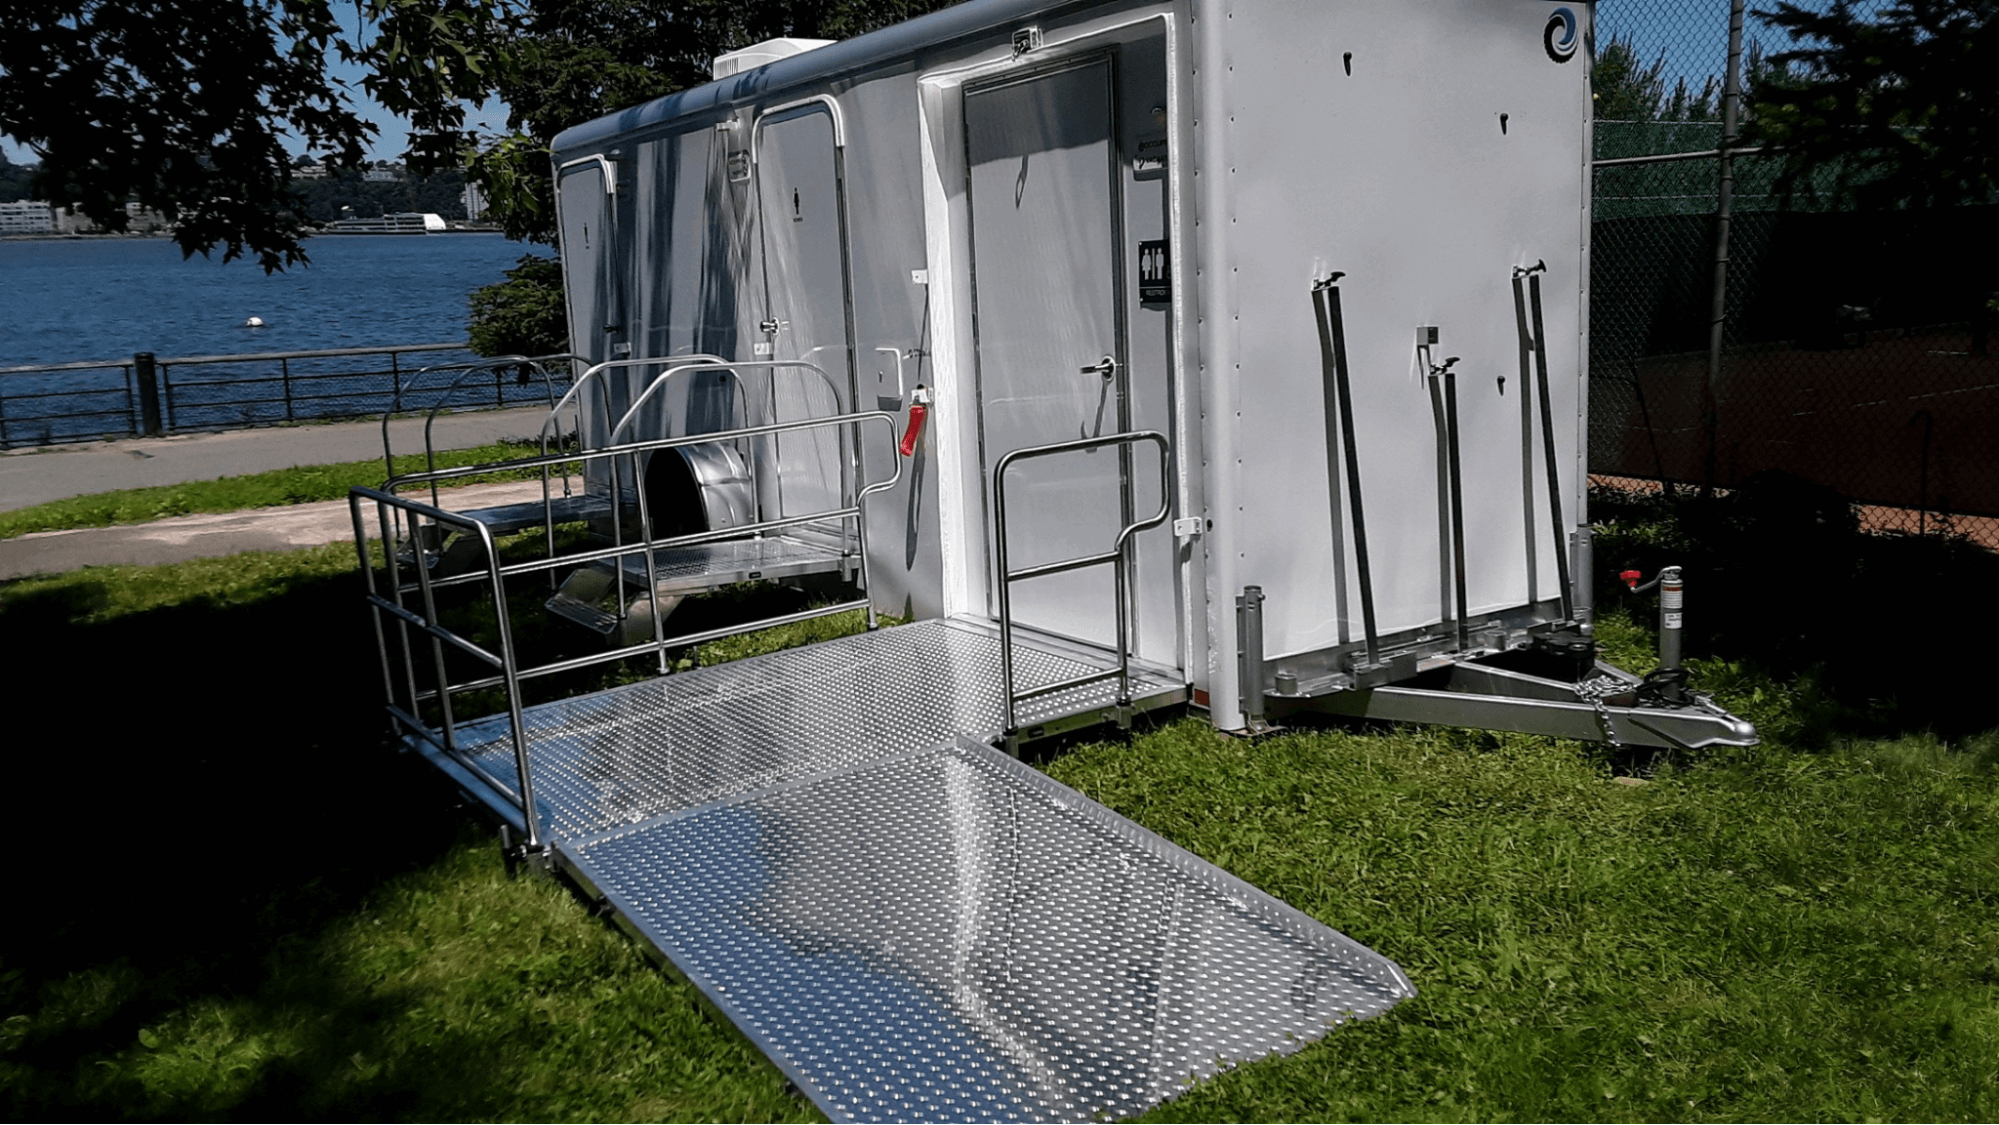 ADA-compliant portable restroom trailers near the waterfront